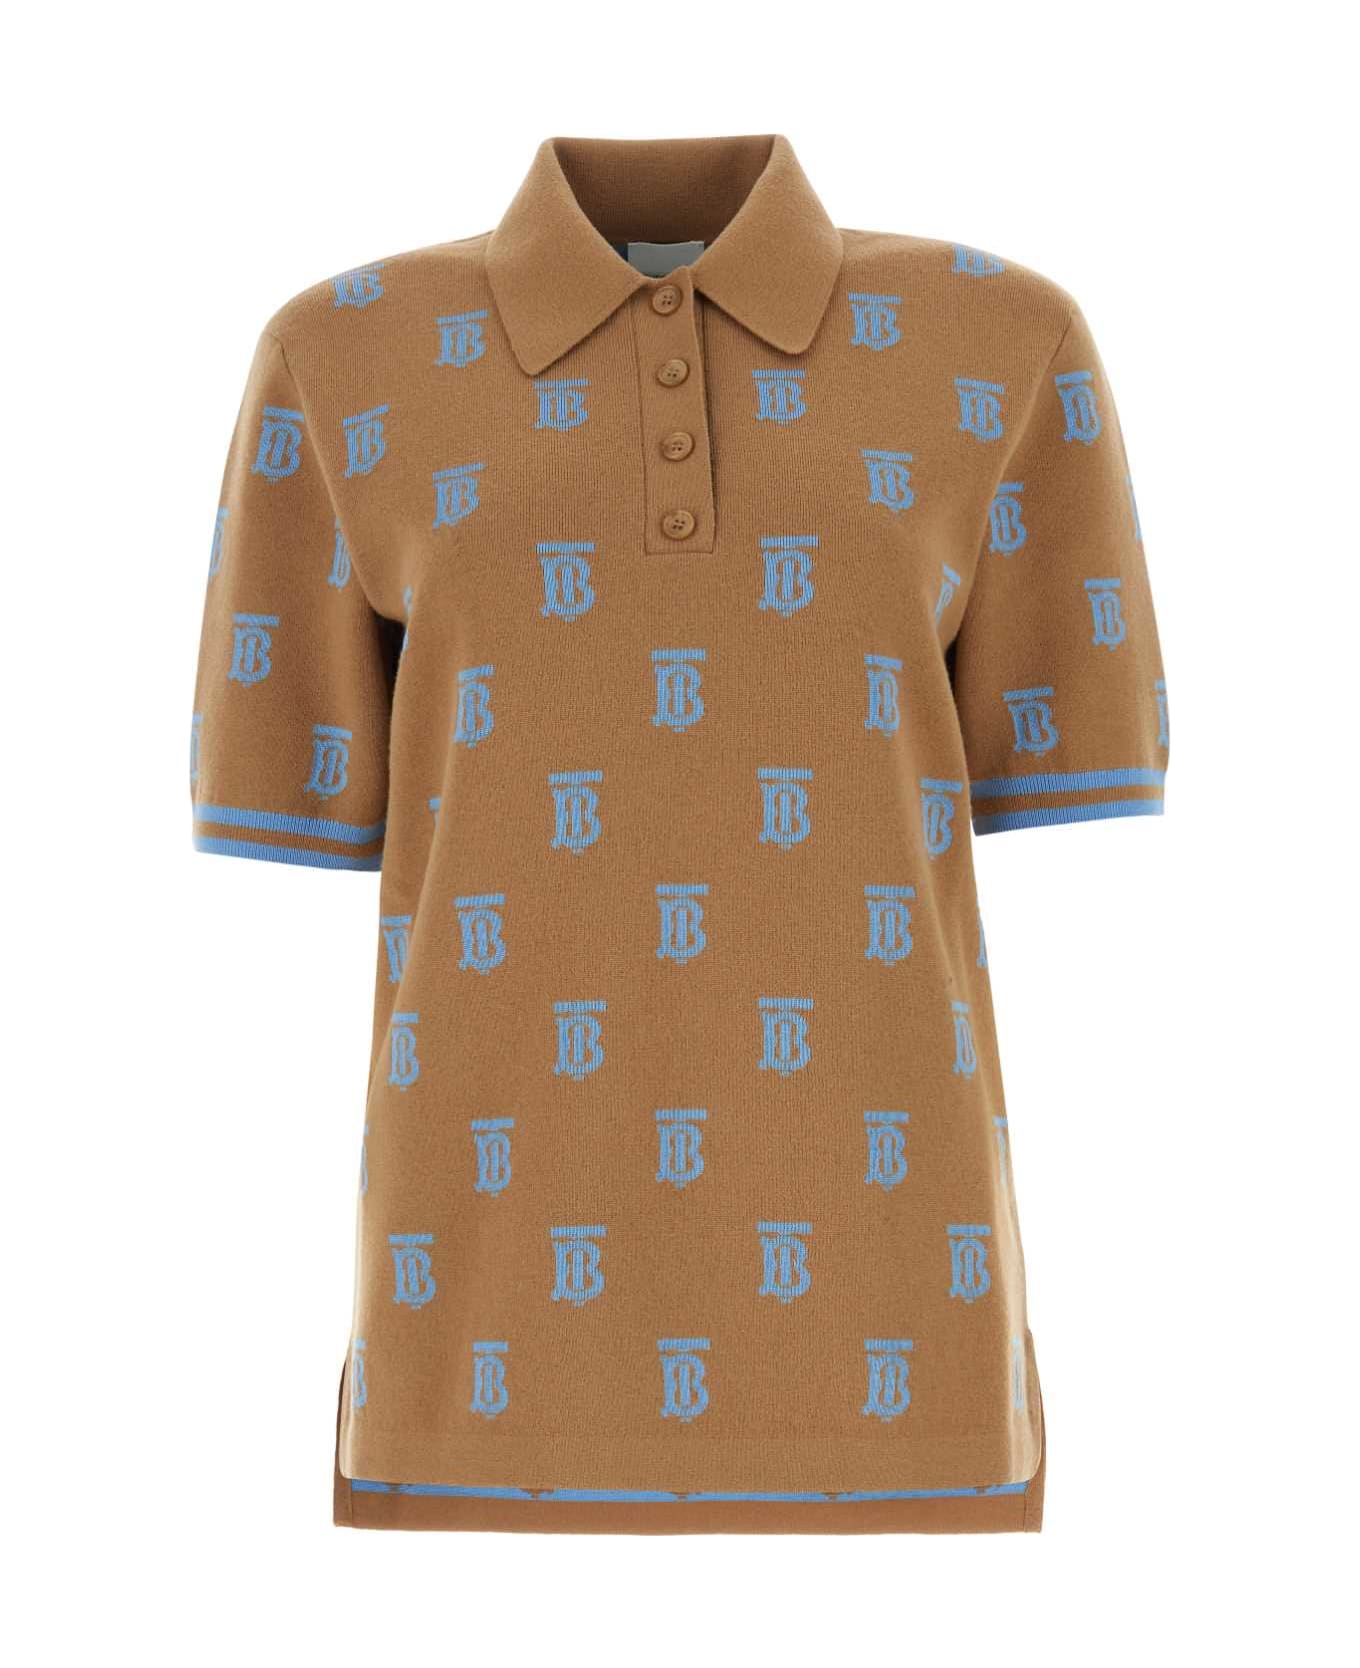 Burberry Embroidered Stretch Wool Blend Polo Shirt - CAMEL